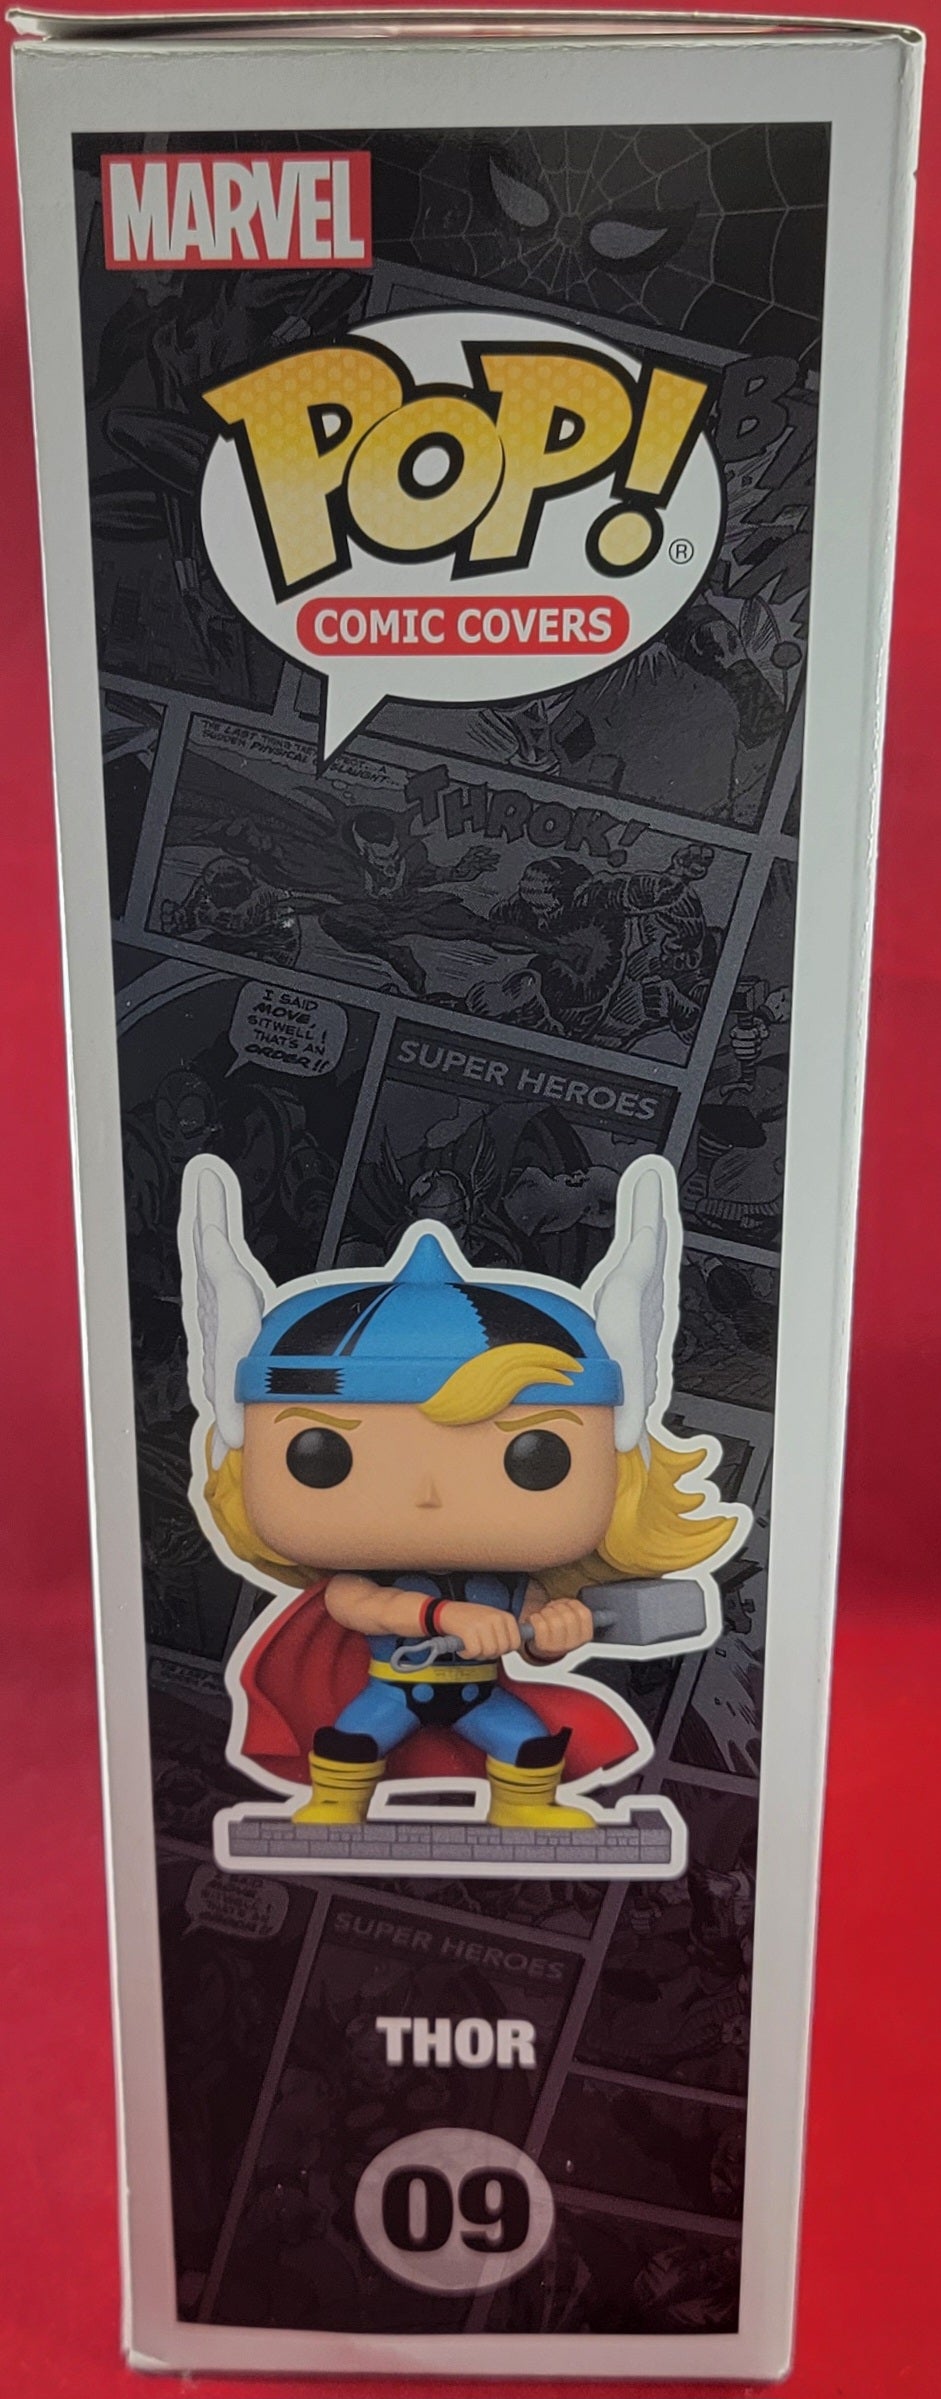 Wal-Mart exclusive comic book thor # 09